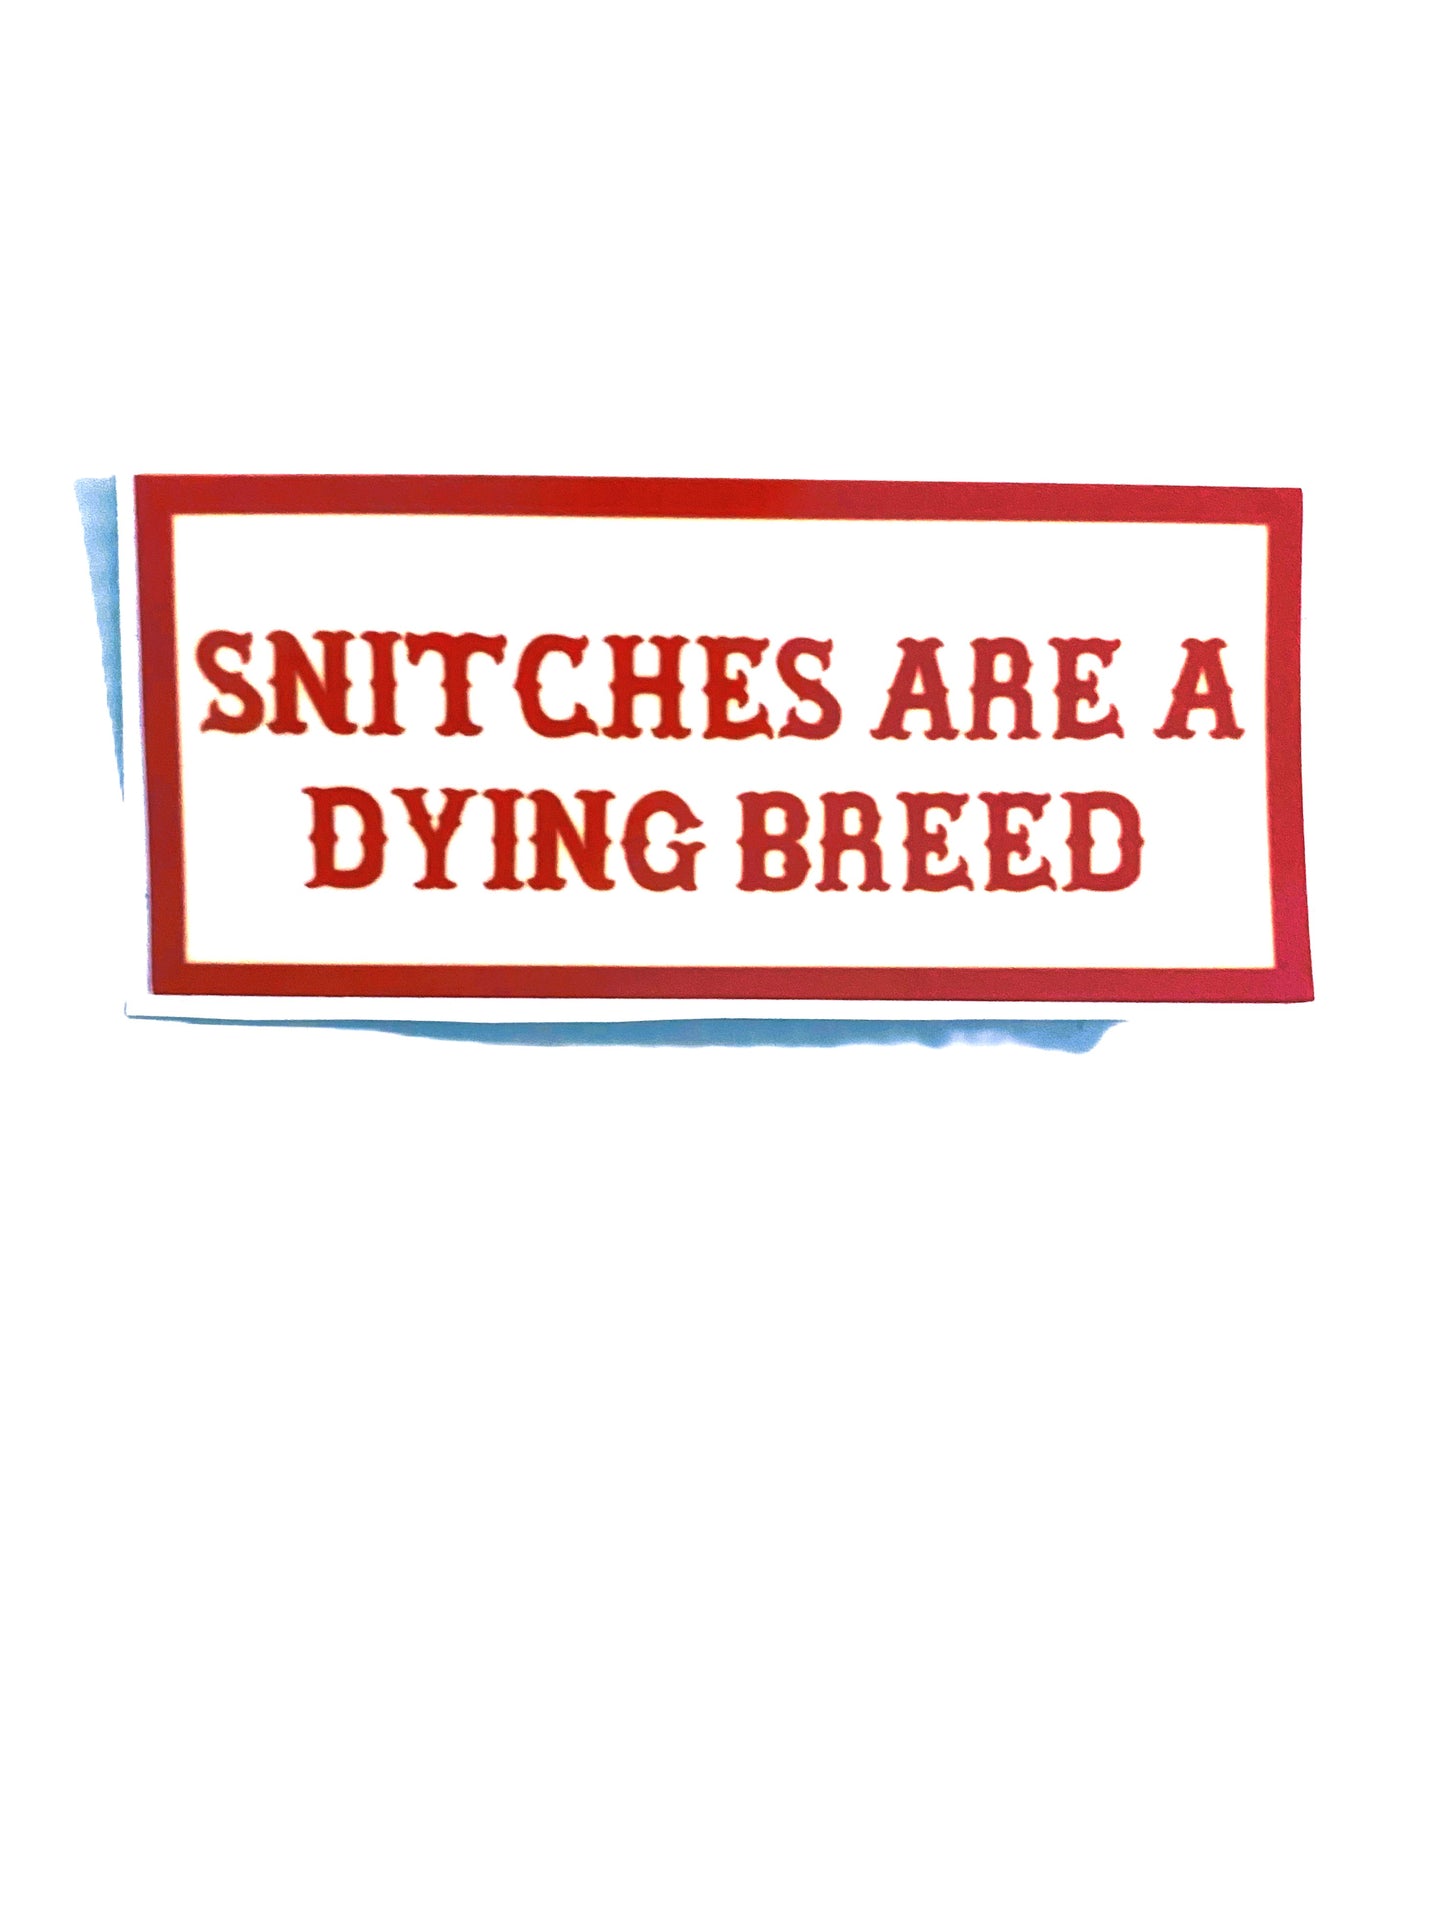 Snitches Are A Dying Breed sticker